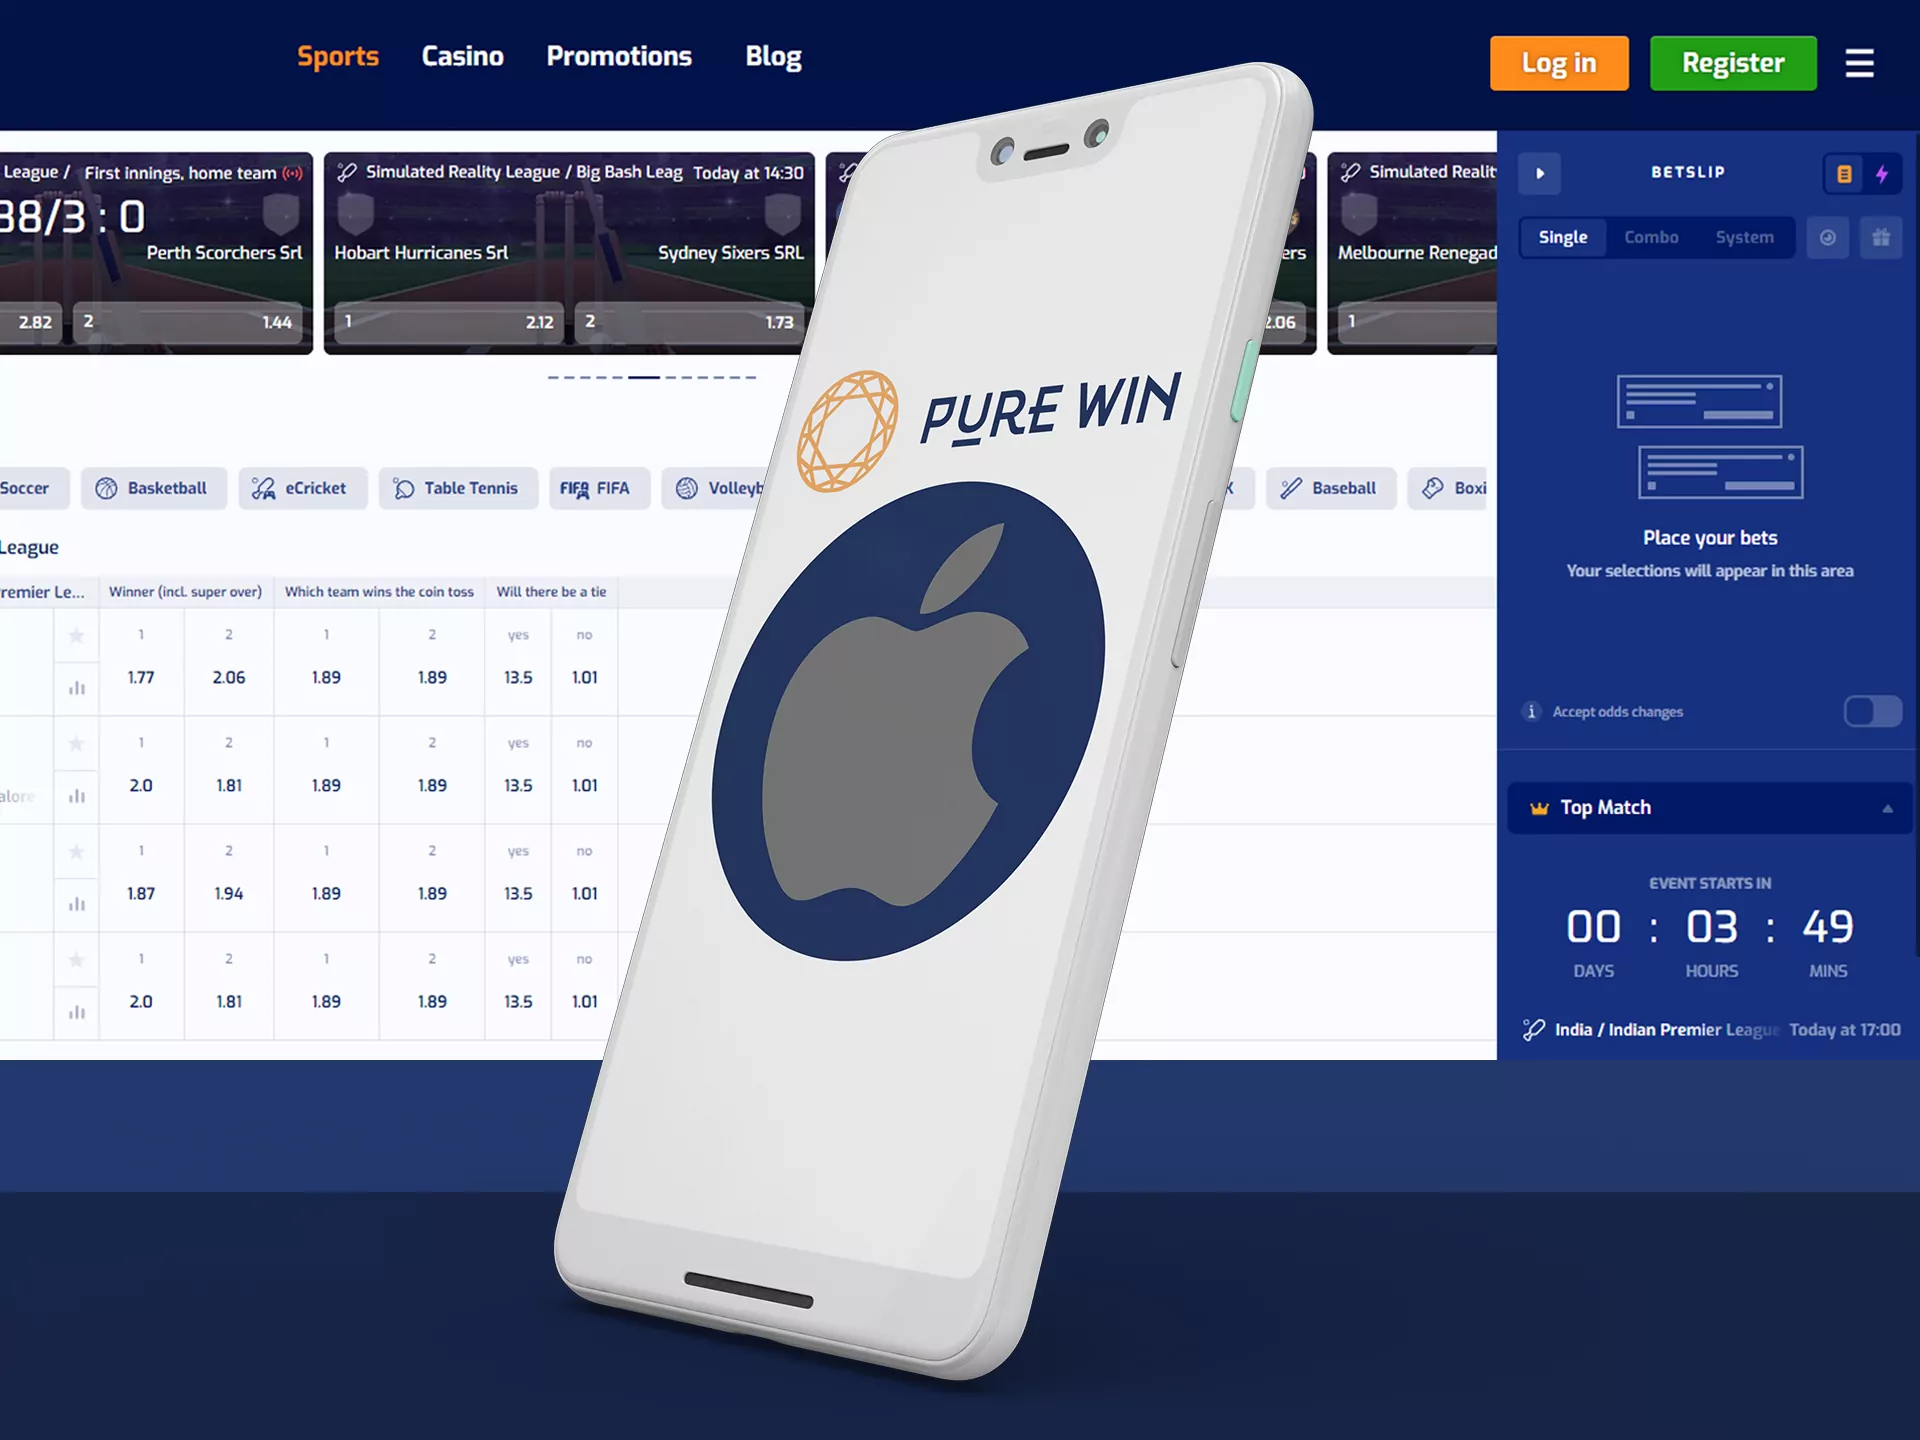 You can bet at Pure Win with your iOS device.